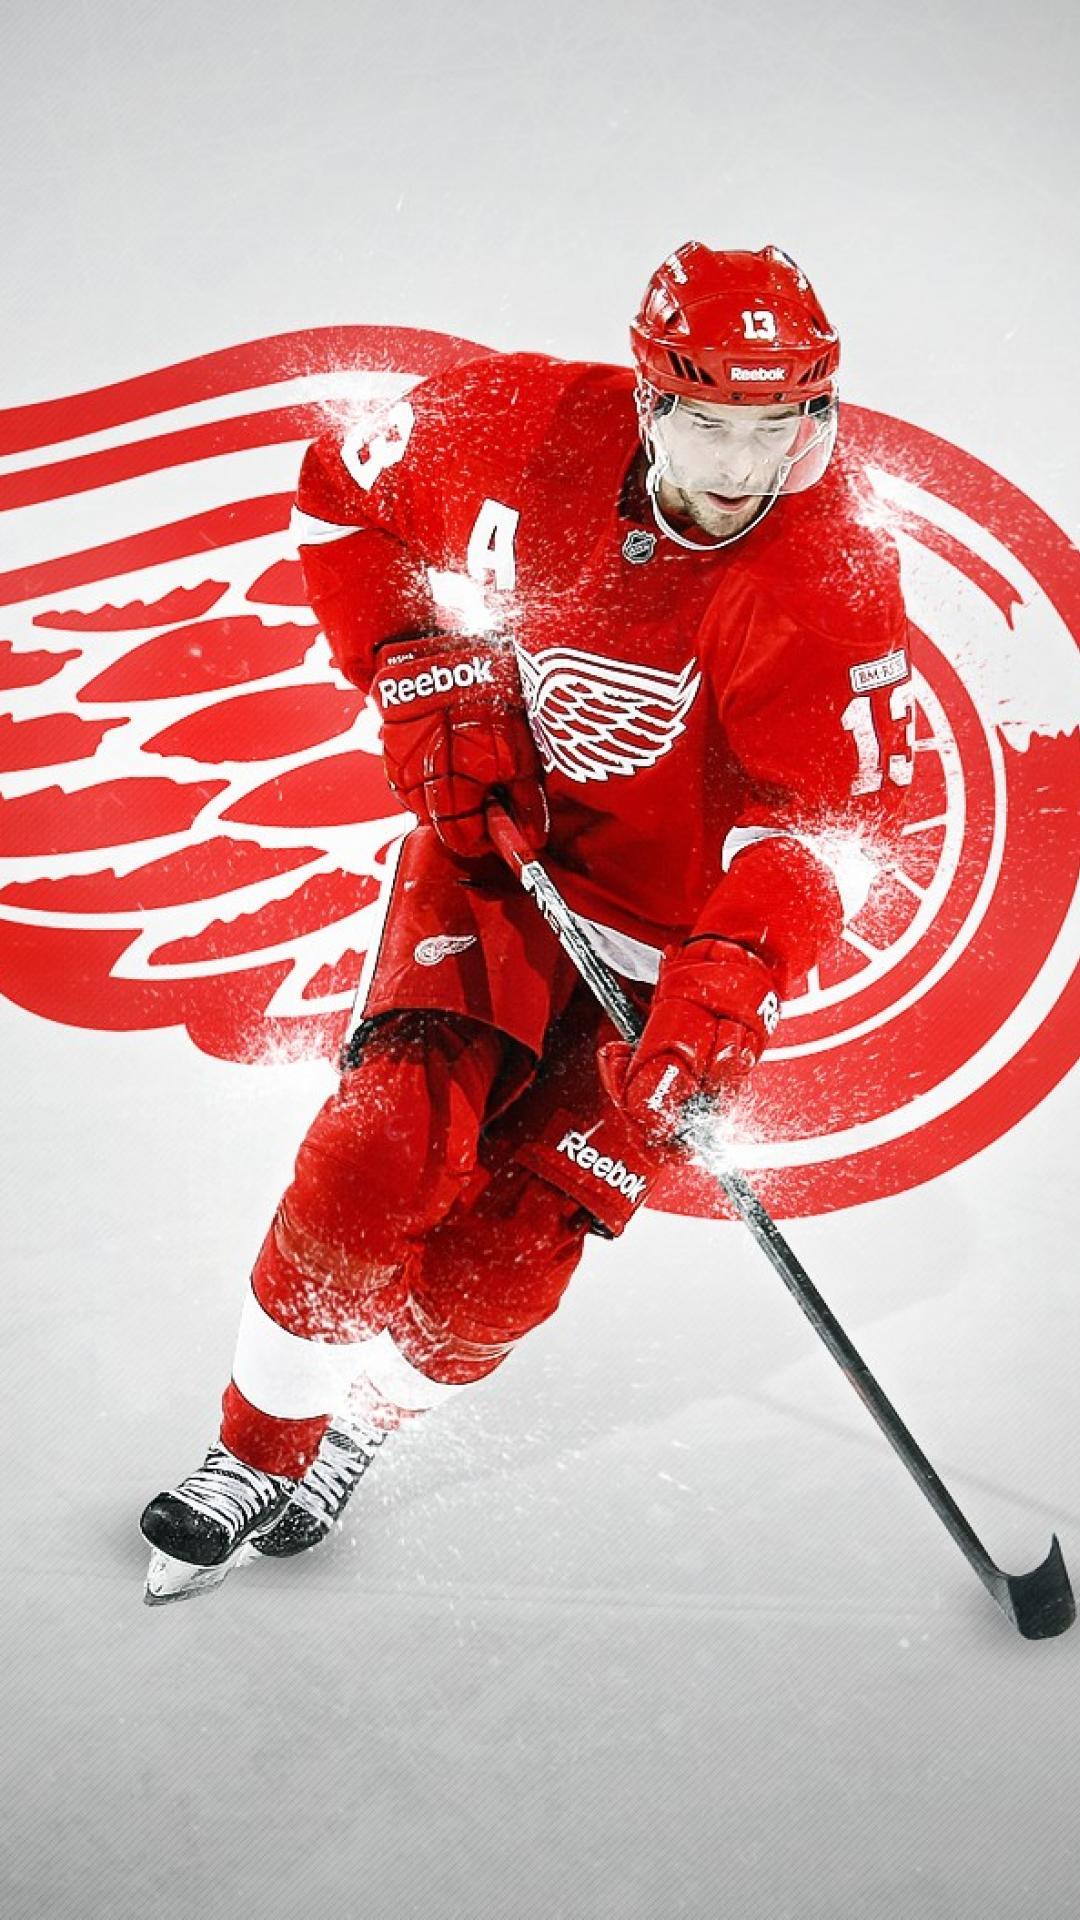 Free download Red Wings Wallpaper Datsyuk And the red wings